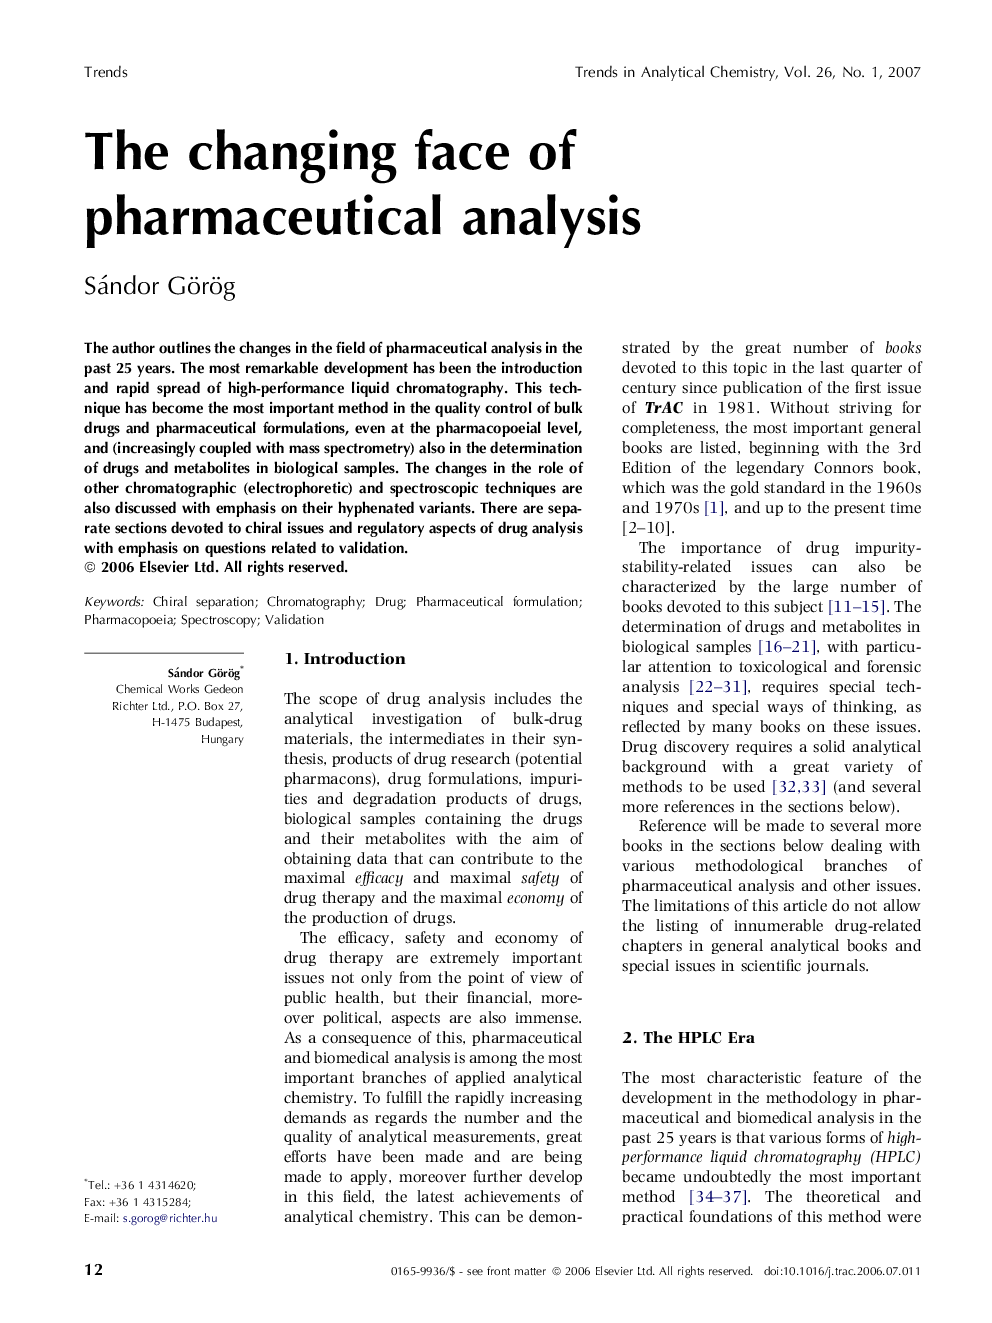 The changing face of pharmaceutical analysis